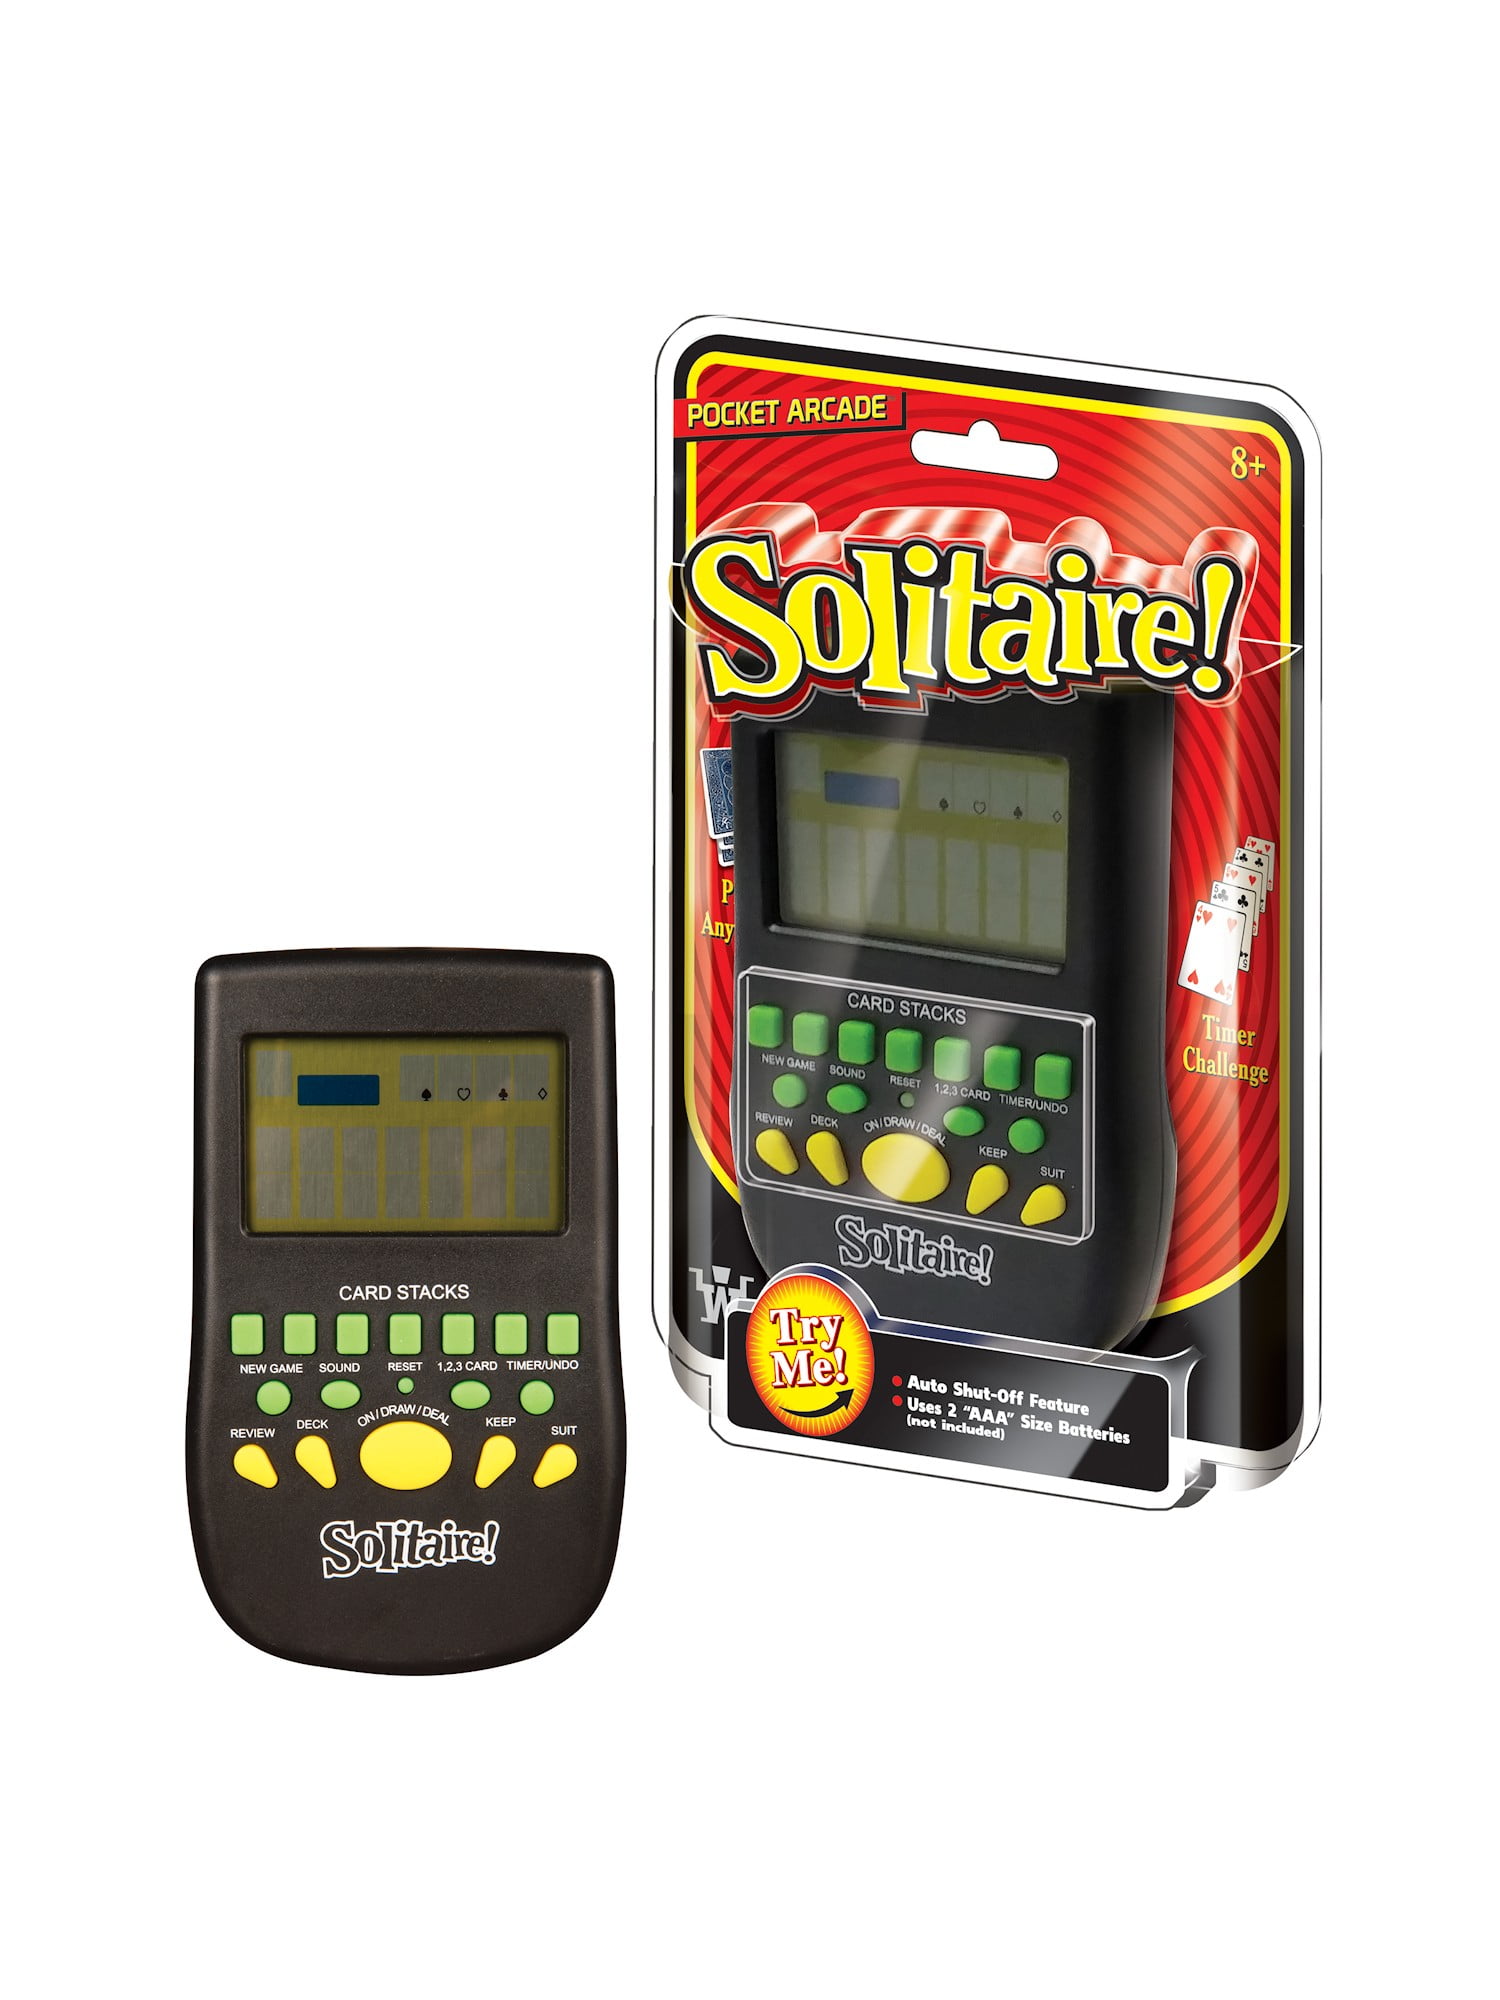 Handheld SOLITAIRE Electronic Pocket Arcade Hand Held Travel Card Game Toy